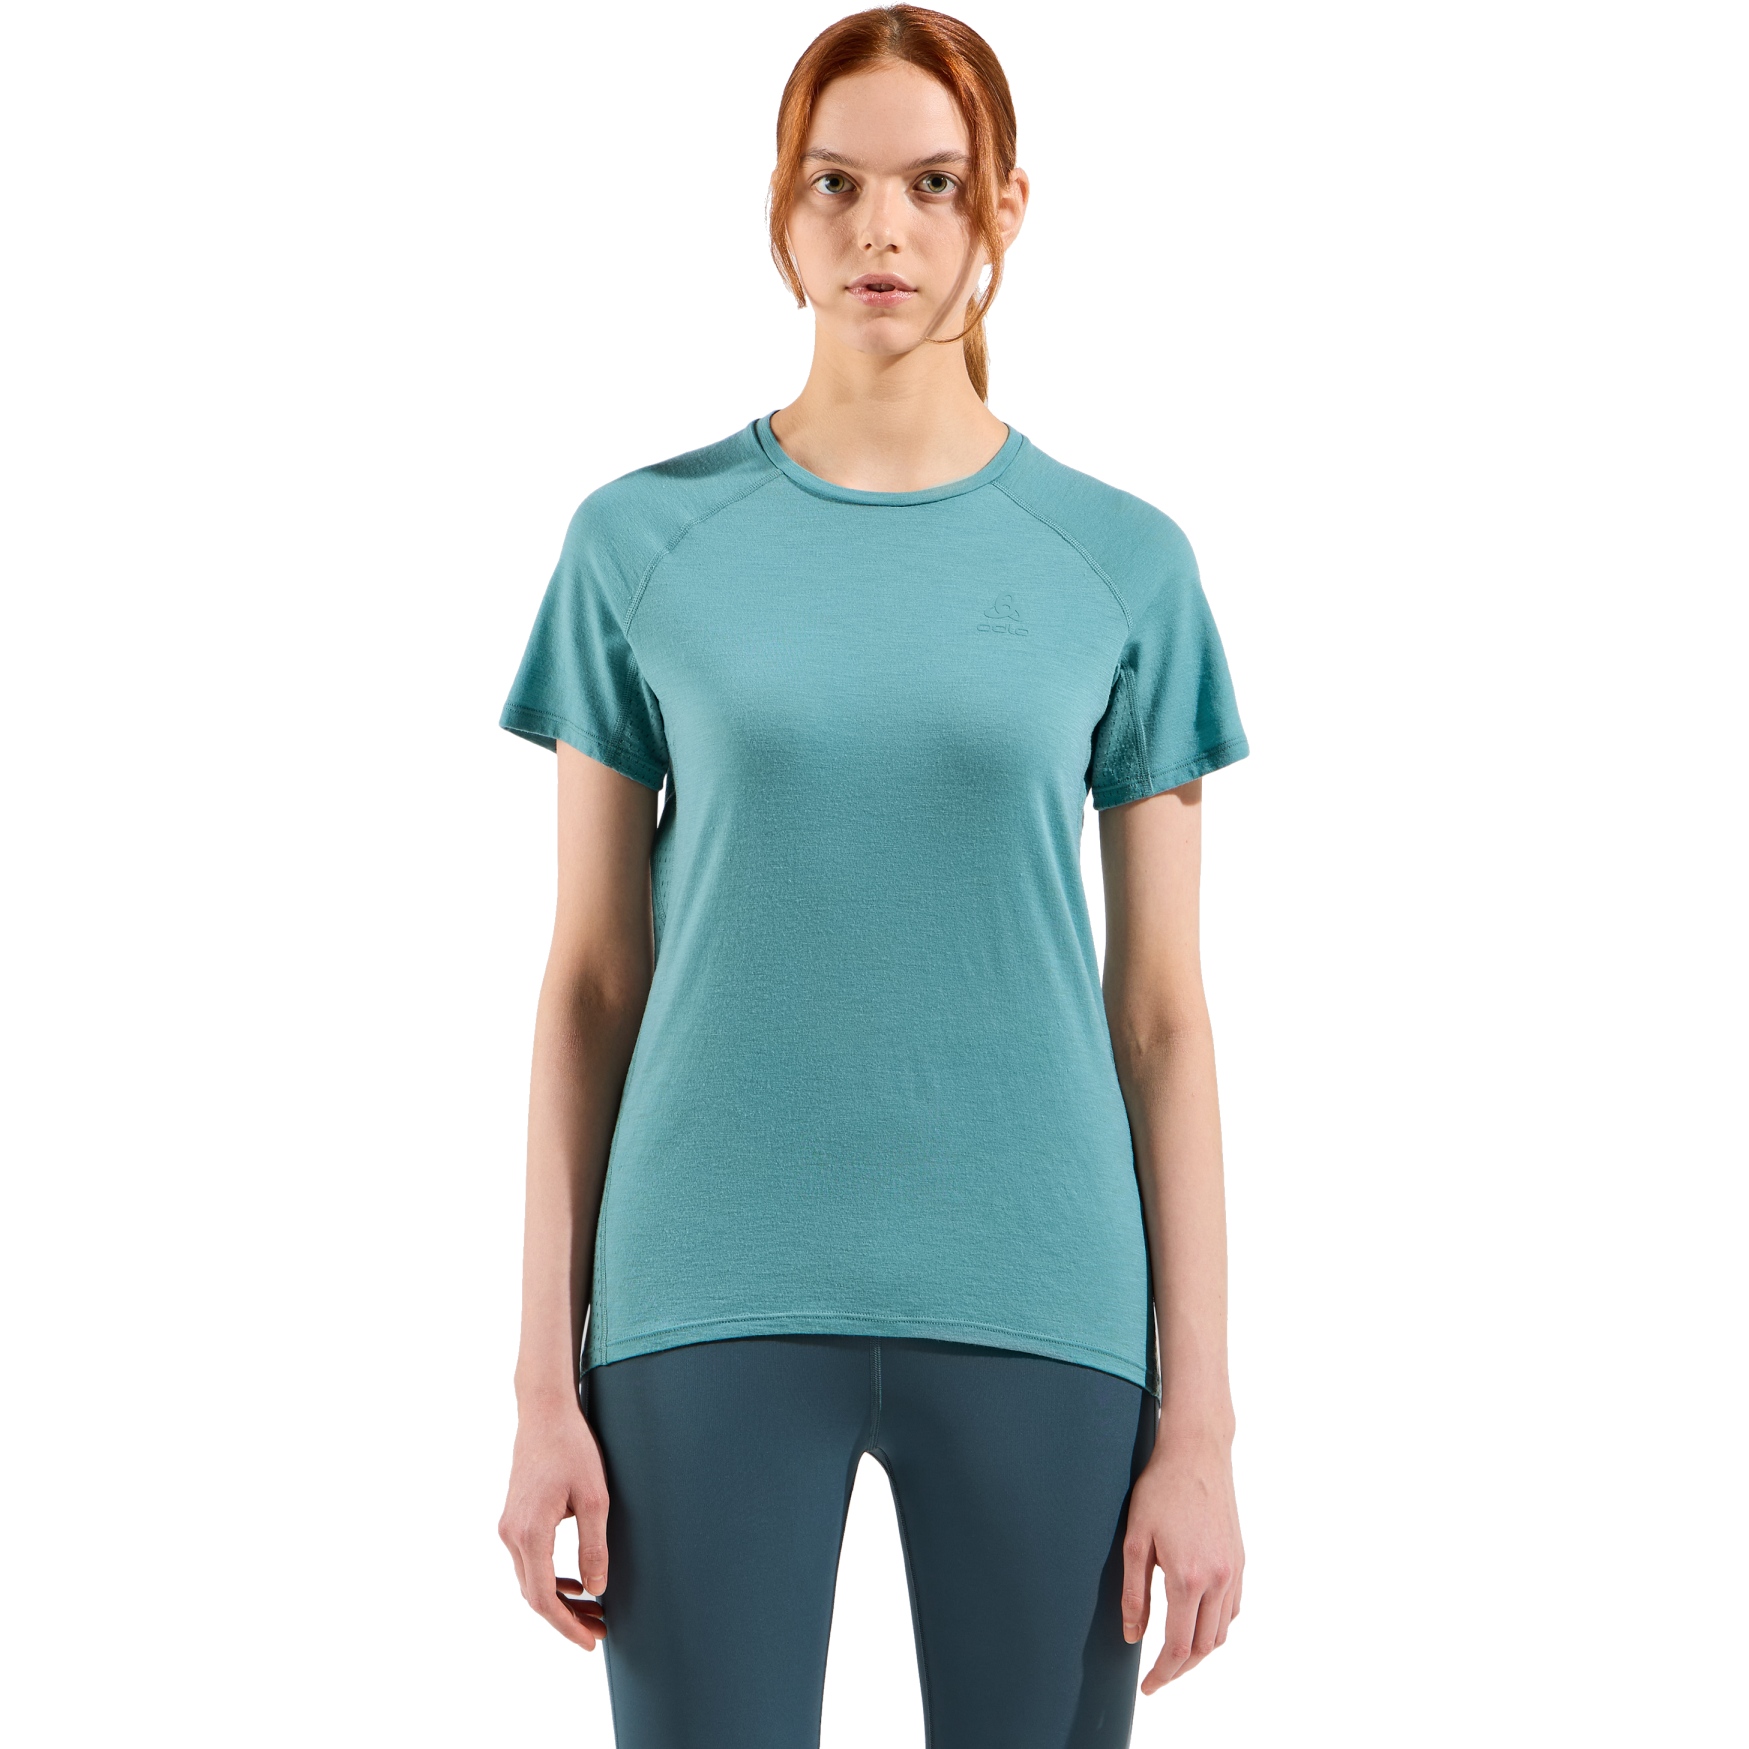 Picture of Odlo Ascent Performance Wool 125 T-Shirt Women - arctic